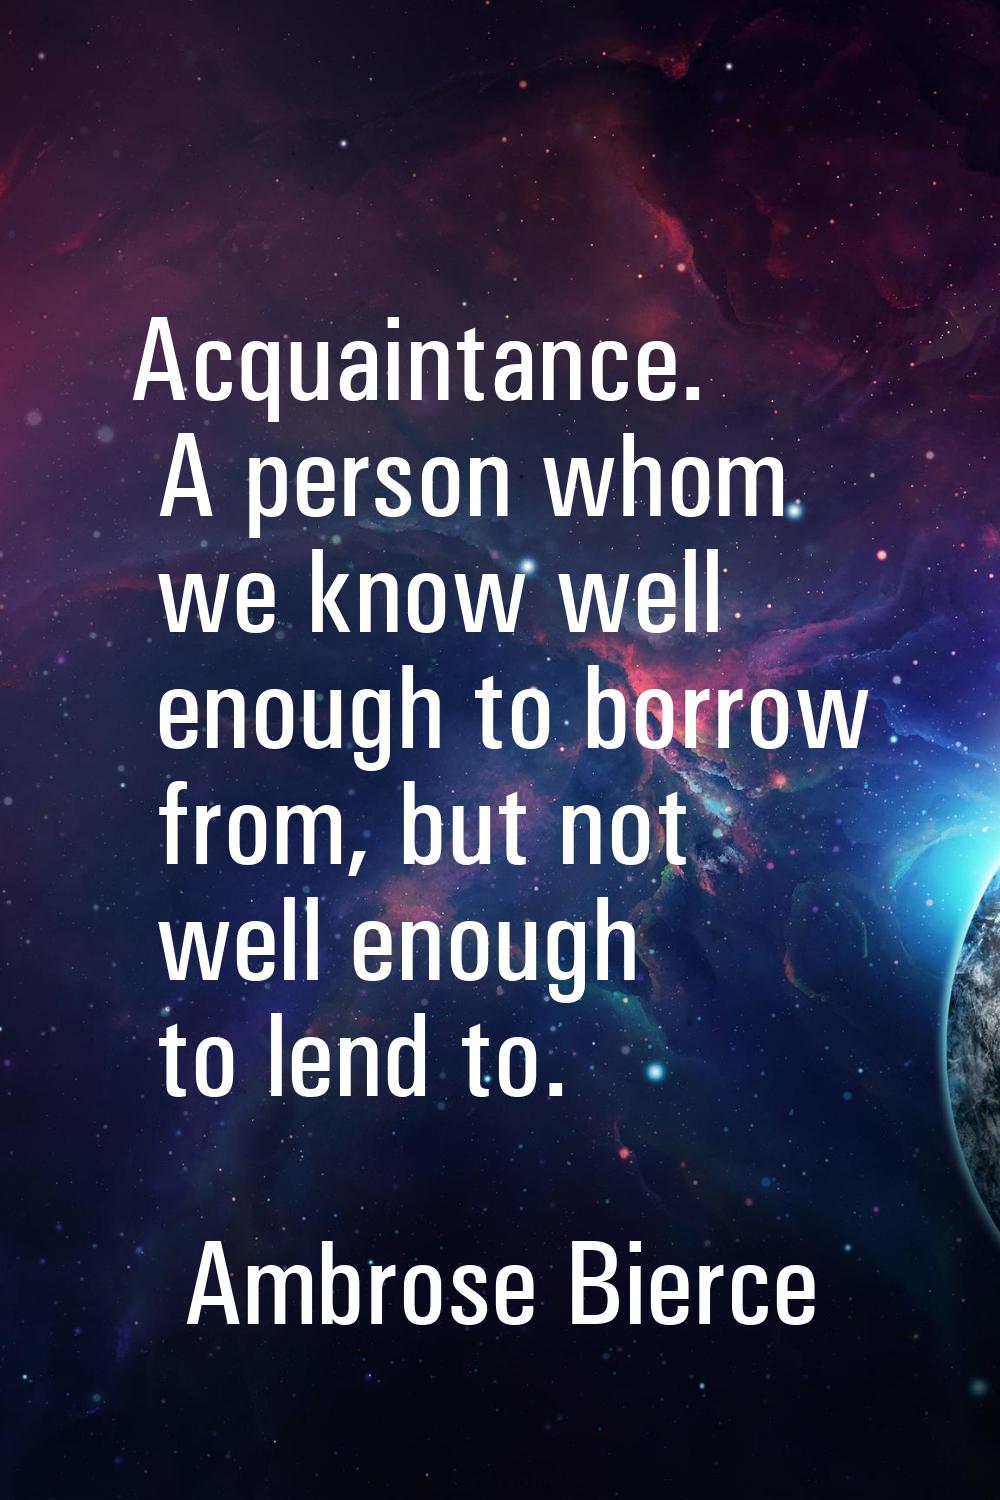 Acquaintance. A person whom we know well enough to borrow from, but not well enough to lend to.